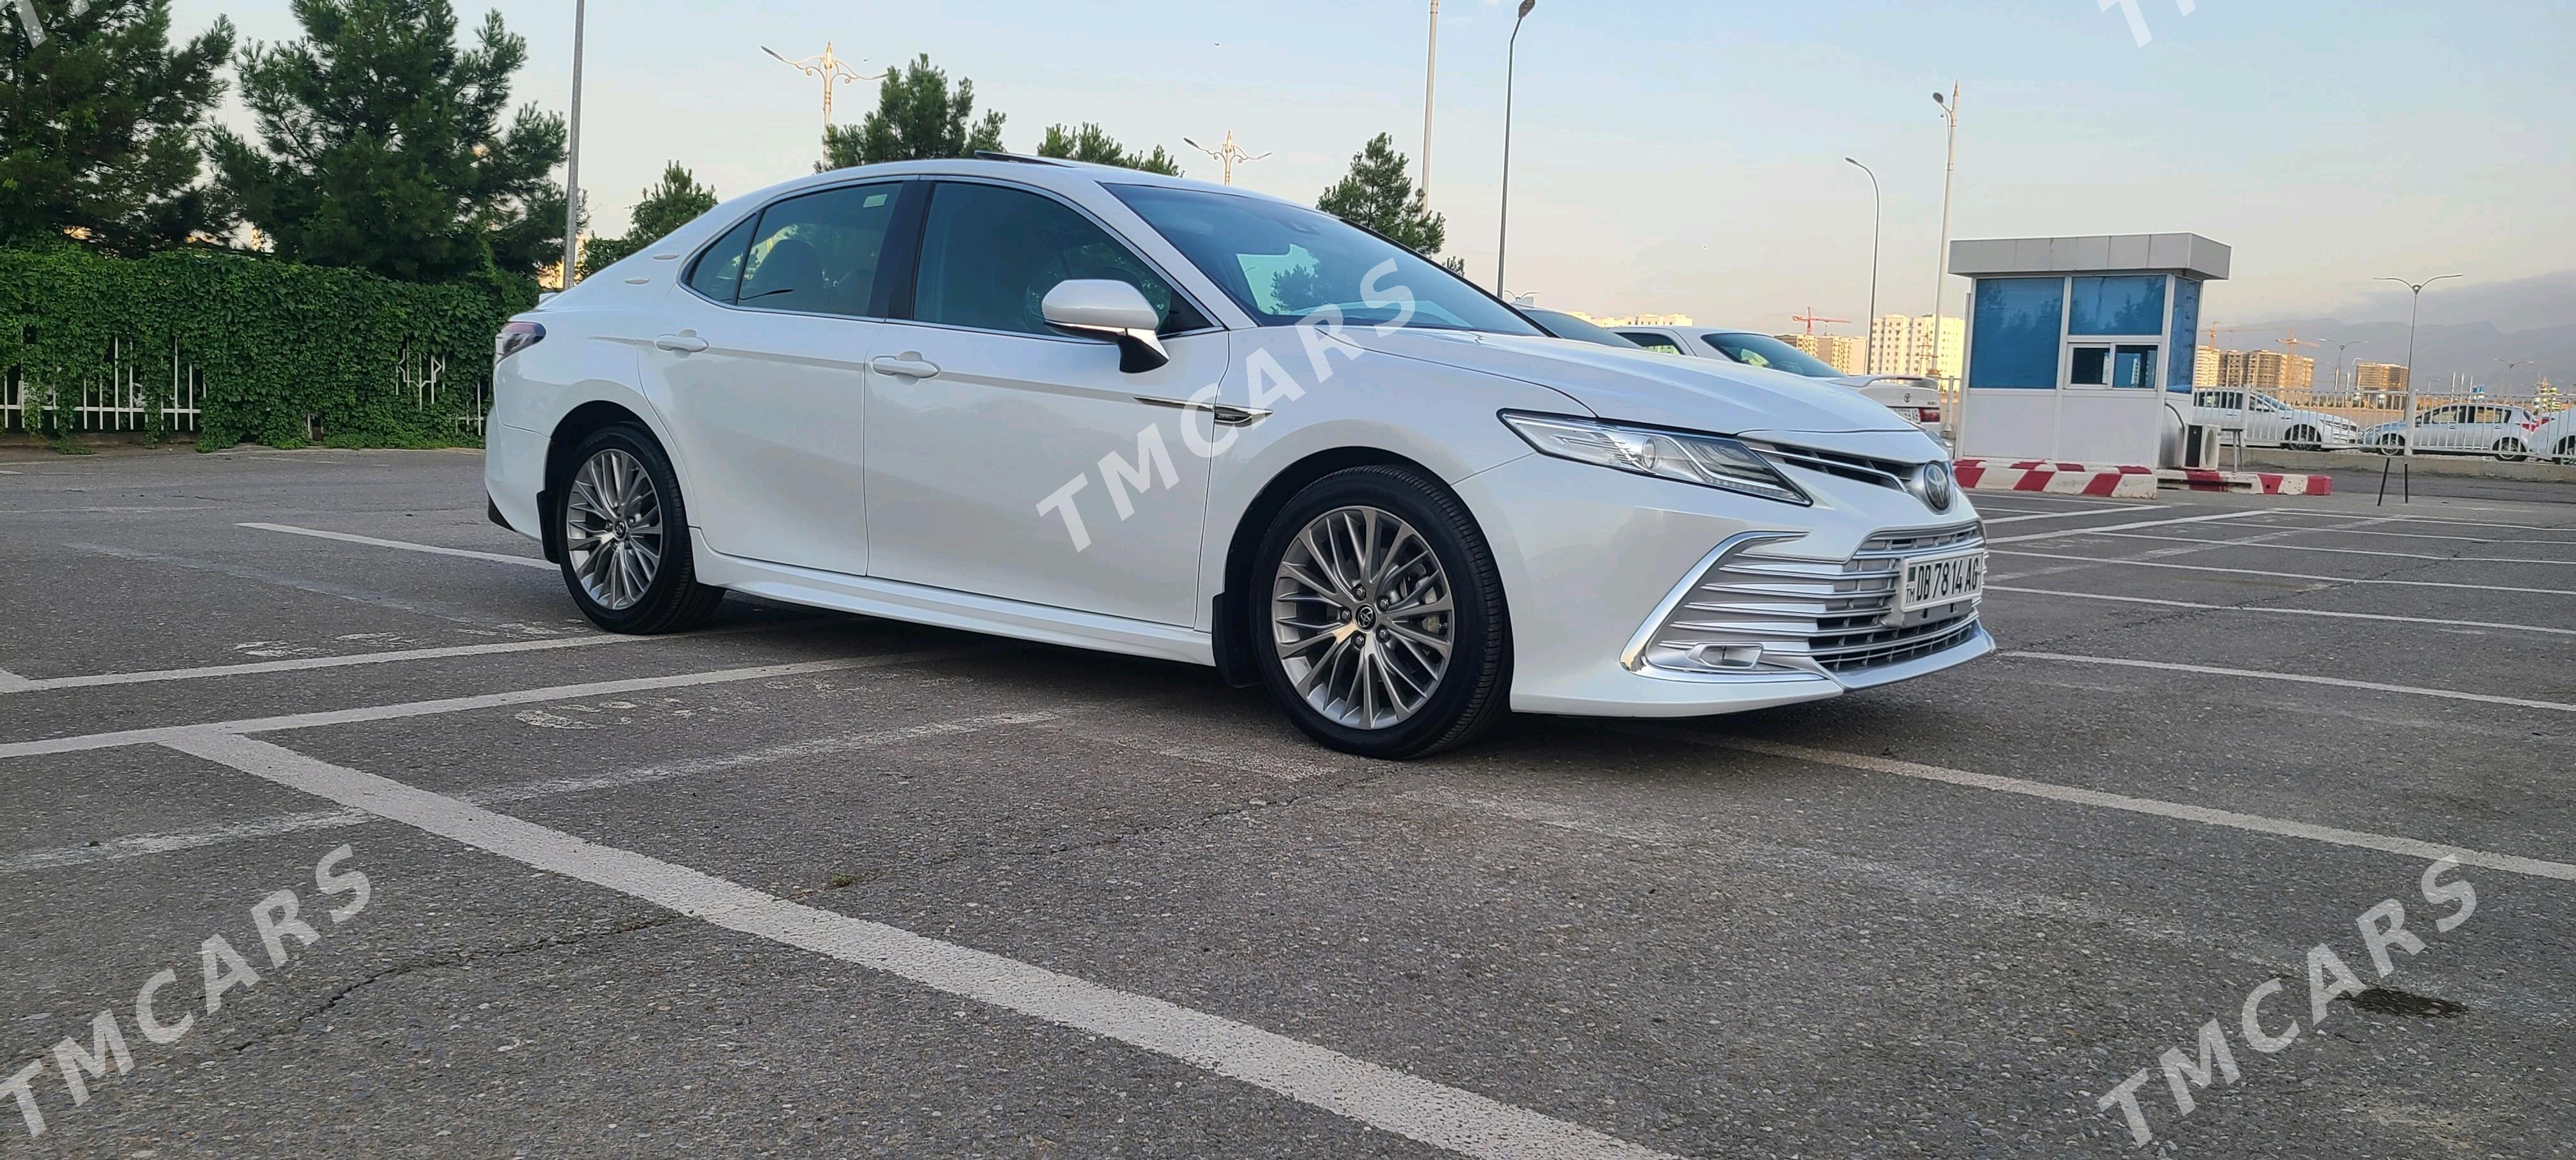 Toyota Camry 2018 - 305 000 TMT - 4 mkr - img 2